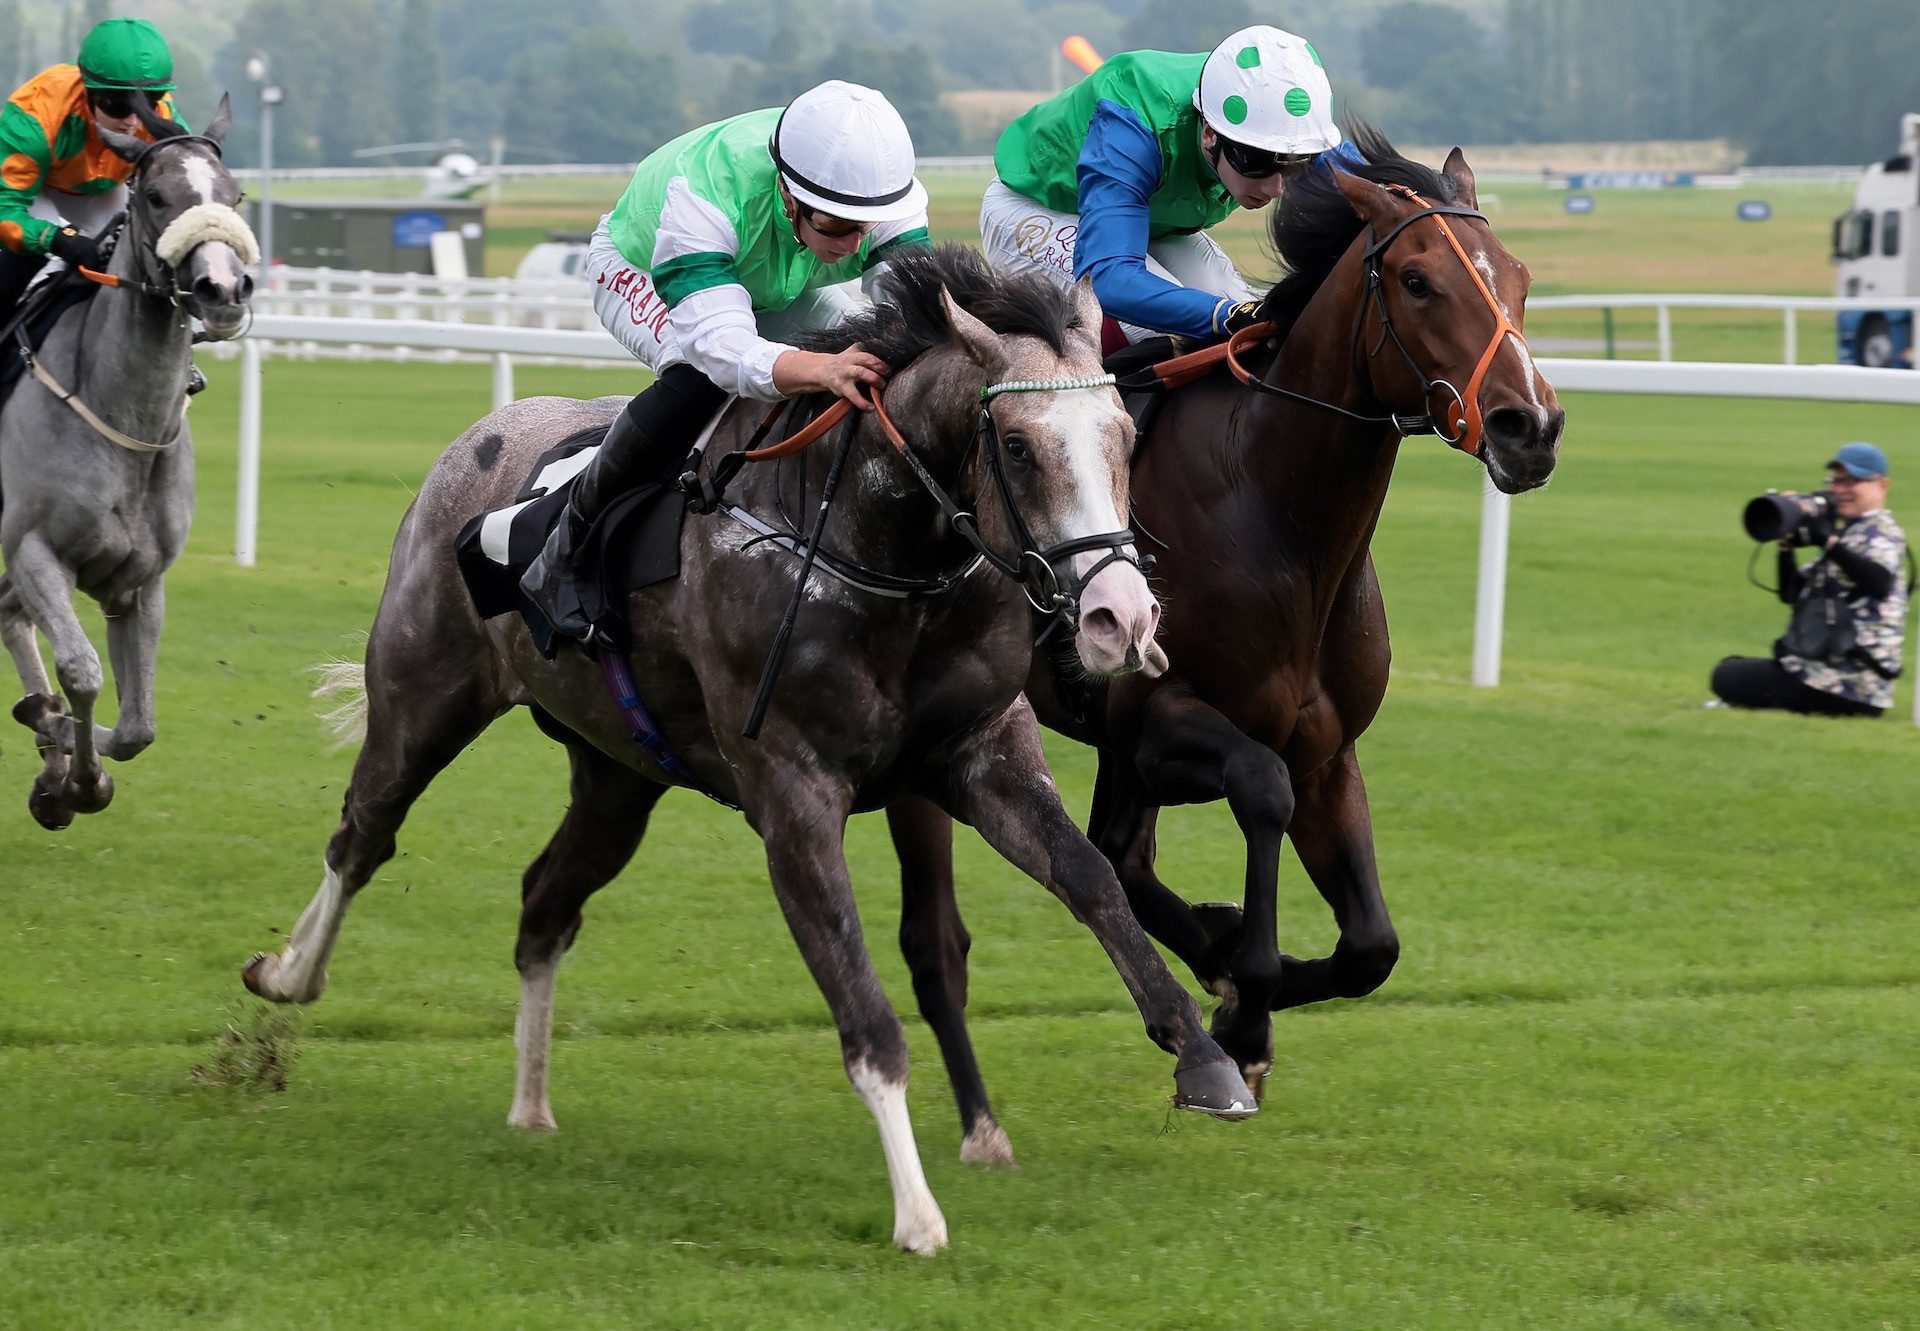 Kingswood Flyer (Sioux Nation) Wins At Newbury